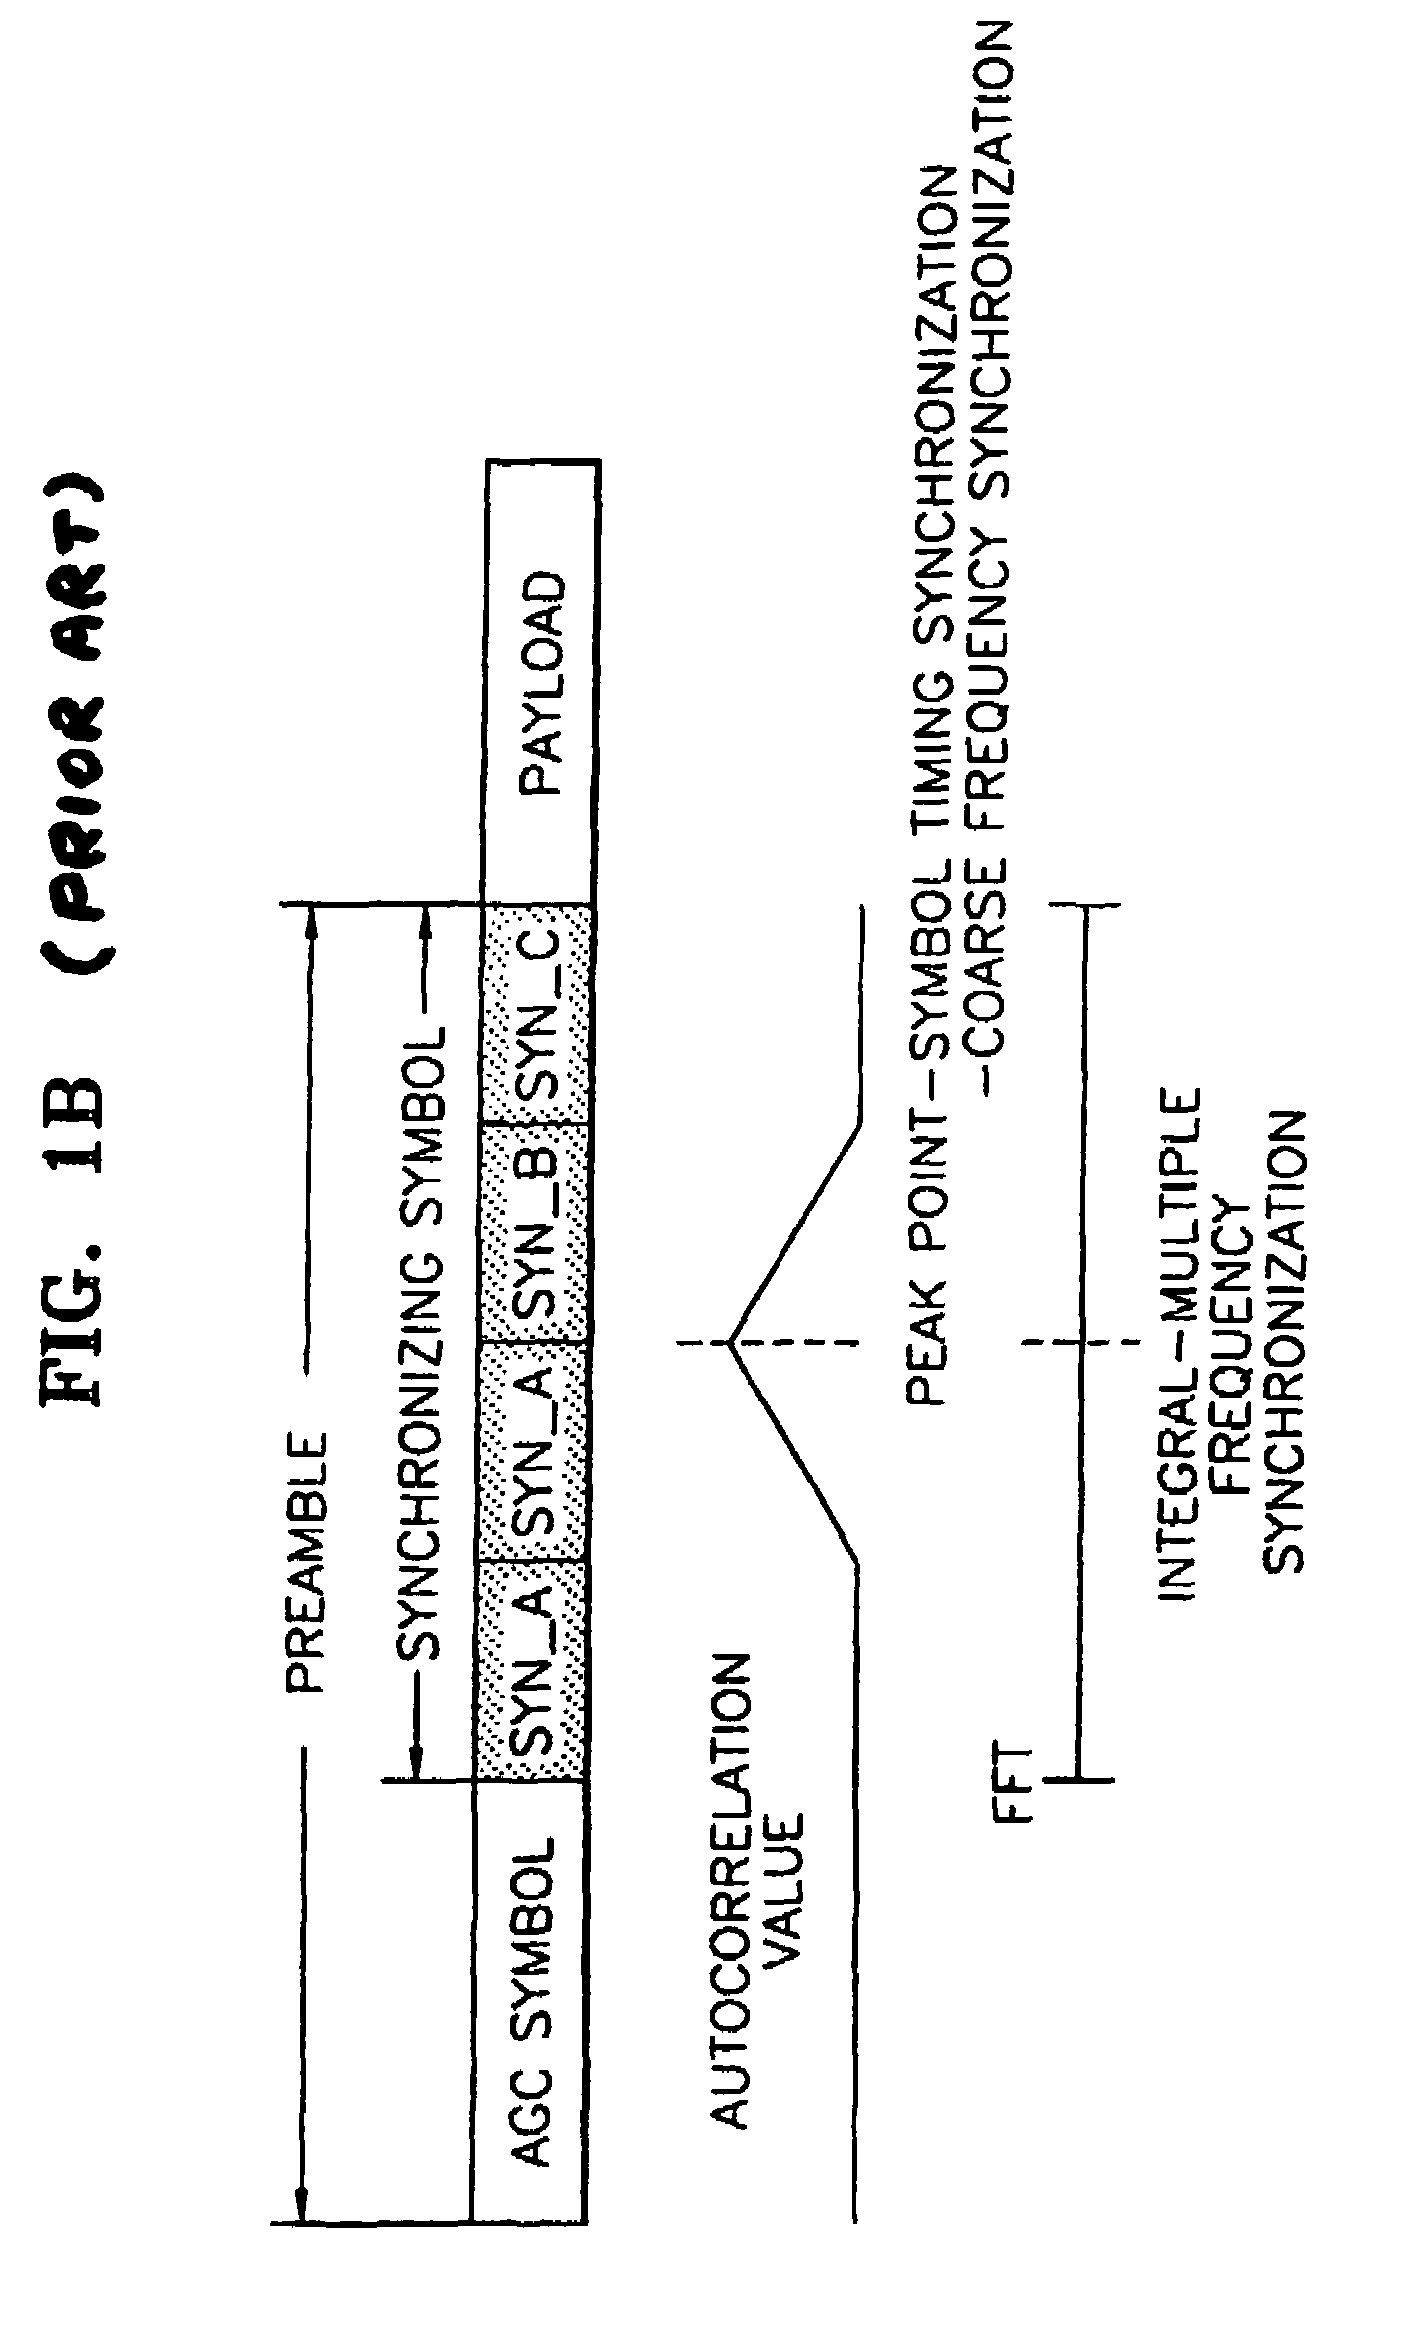 Apparatus and method for achieving symbol timing and frequency synchronization to orthogonal frequency division multiplexing signal